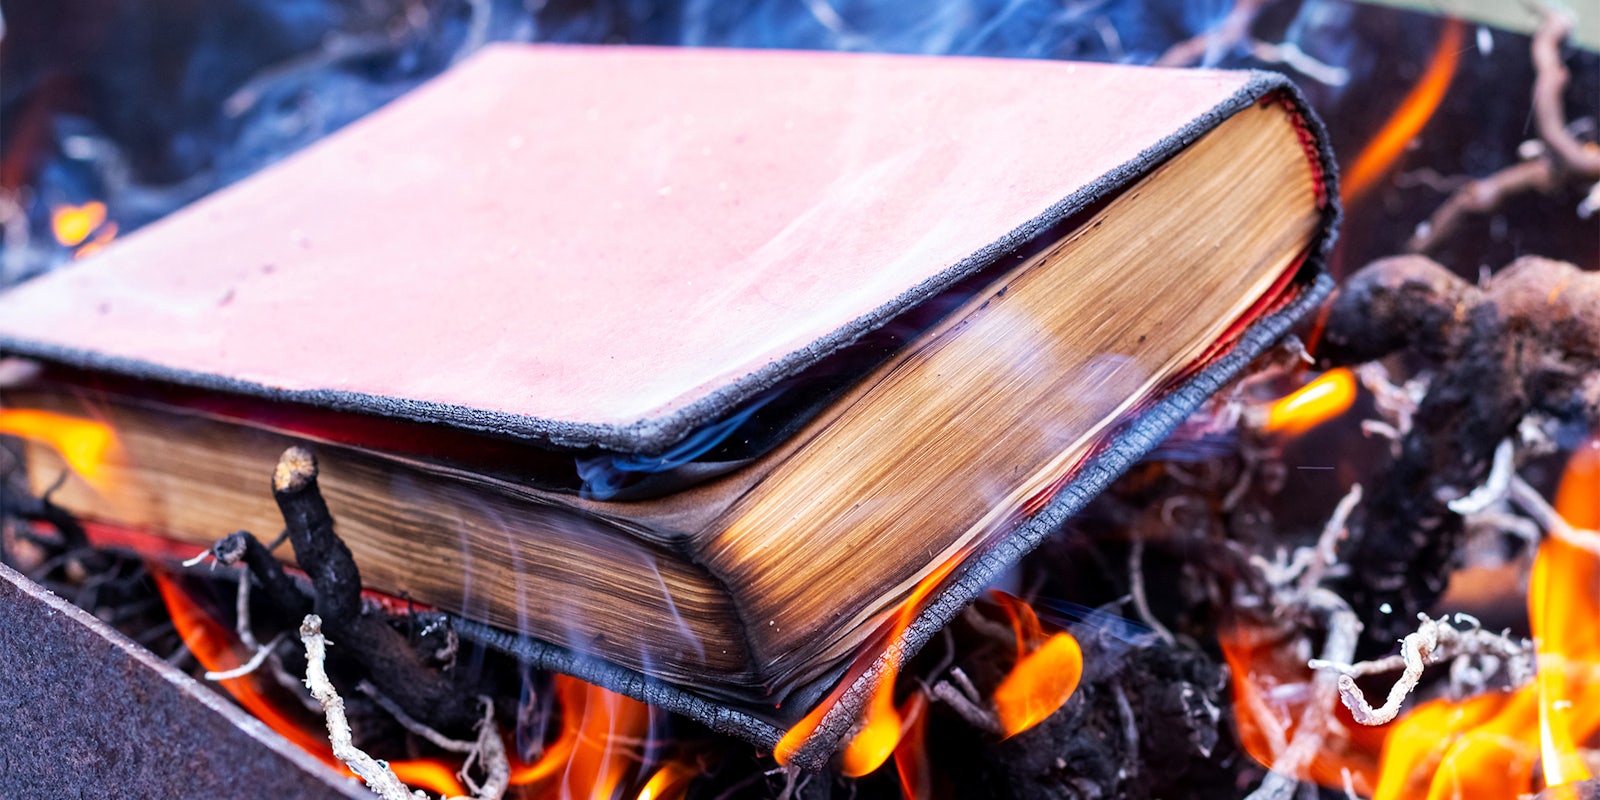 A thick book on fire